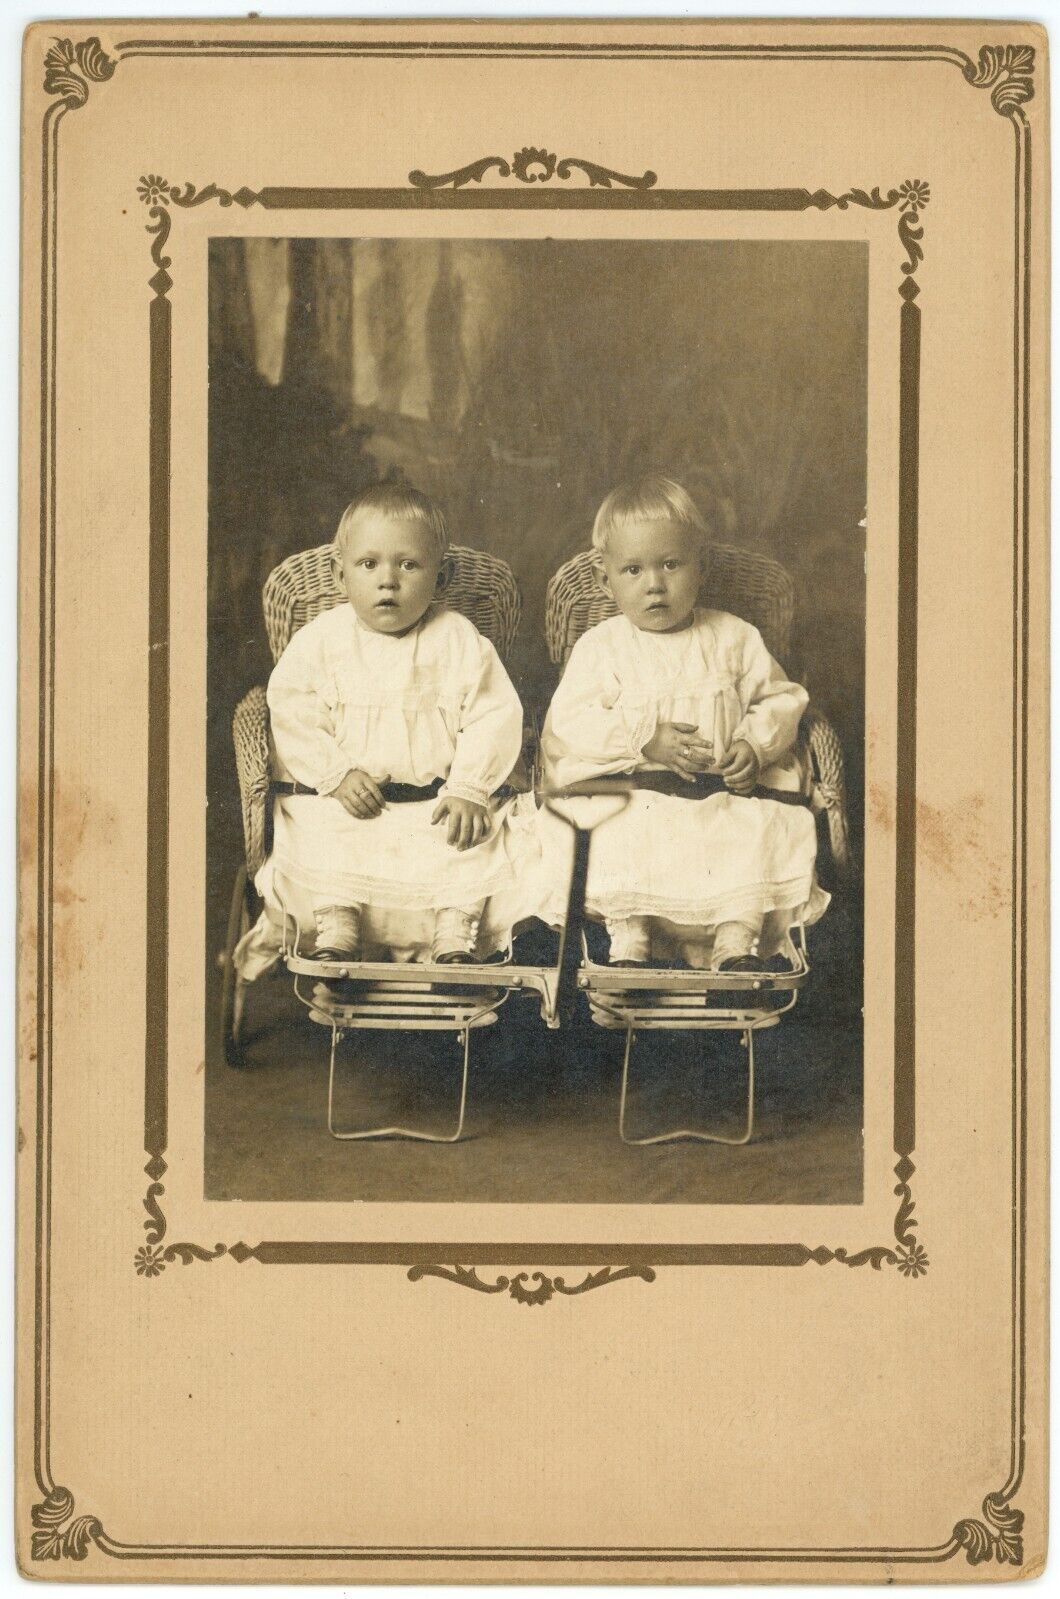 CIRCA 1880'S *RARE* LARGE ANTIQUE CABINET CARD OF TWO ADORABLE TWINS IN CHAIRS